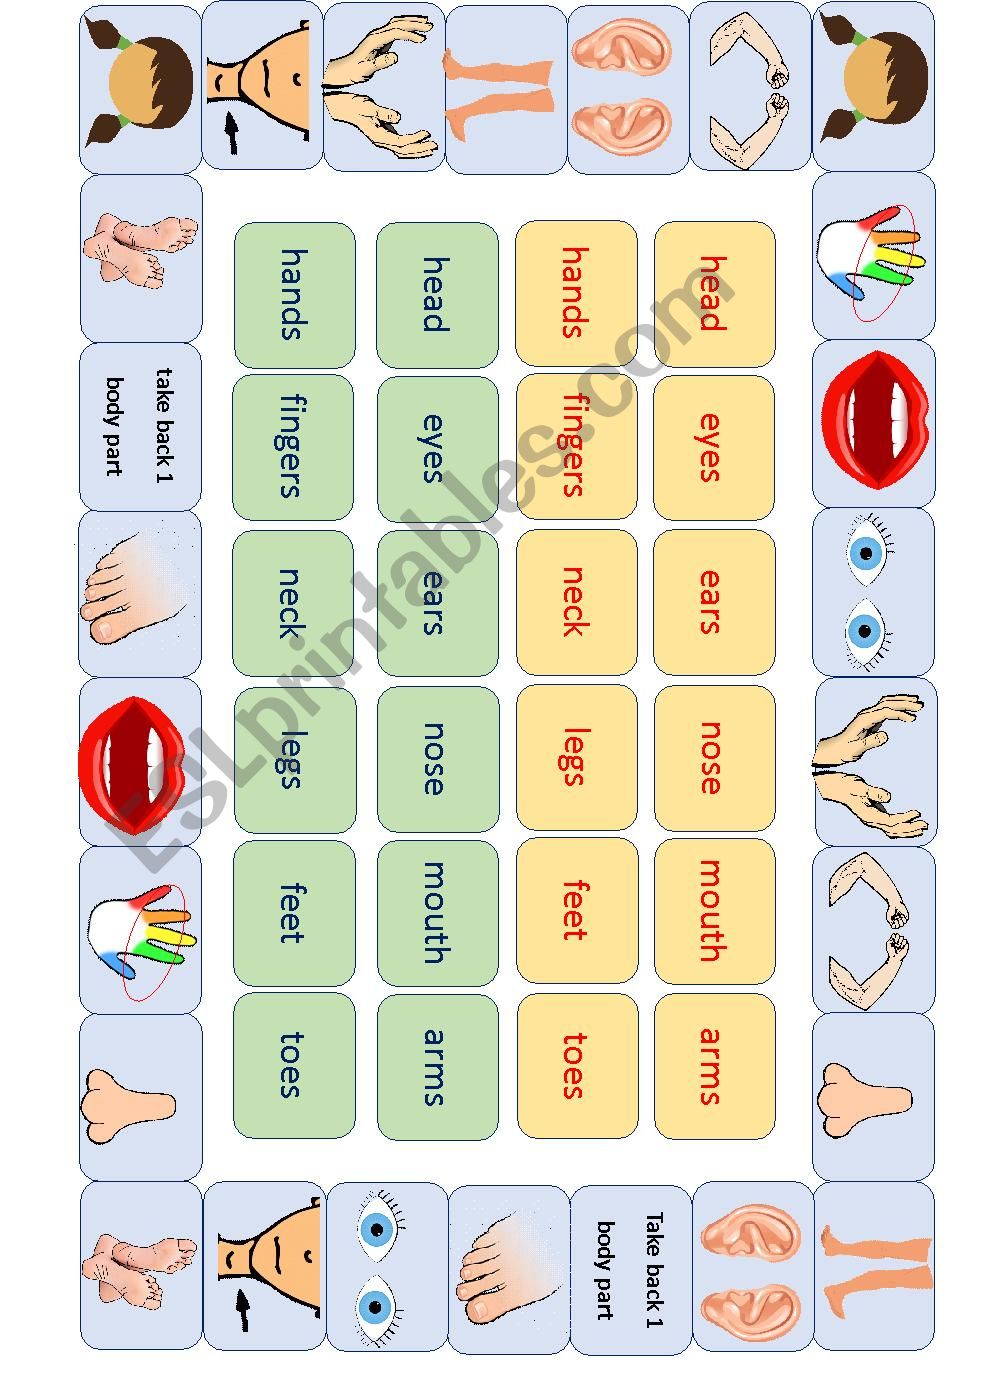 body parts board game worksheet